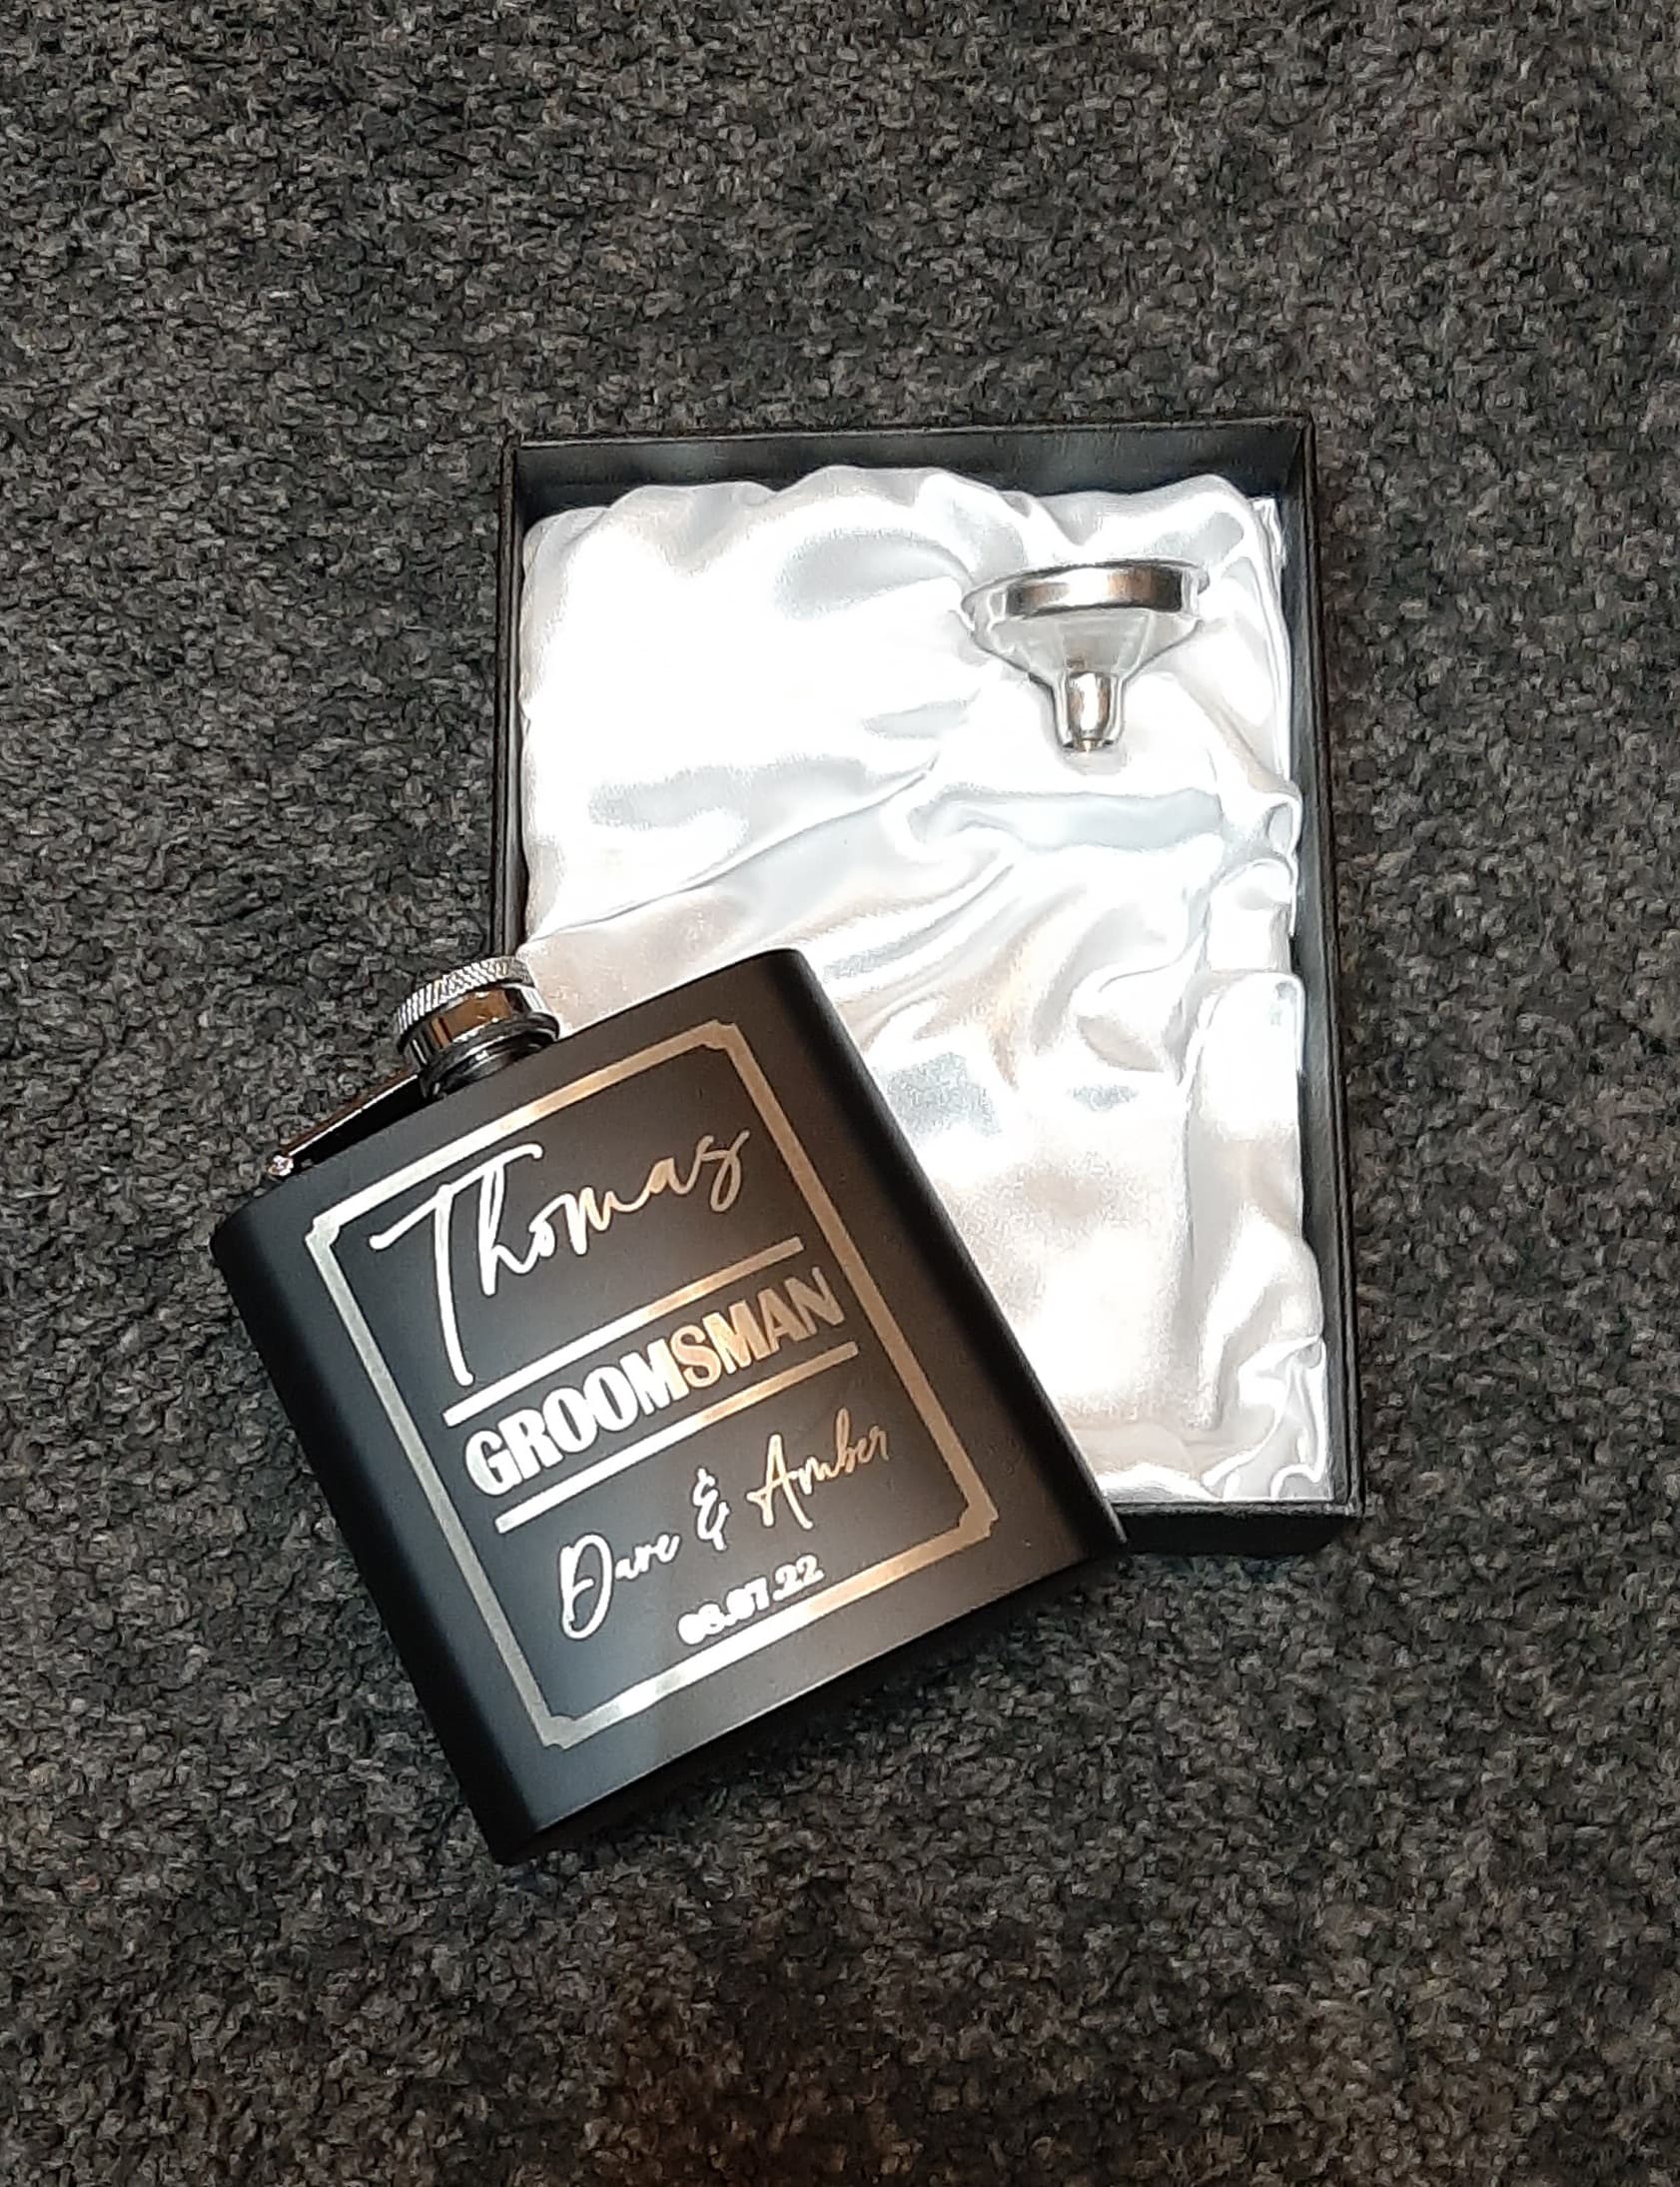 Wedding Hip Flask Gift Set mens wedding gift best man groom page boy grooms men gift occasion personalised with Name and date out of box